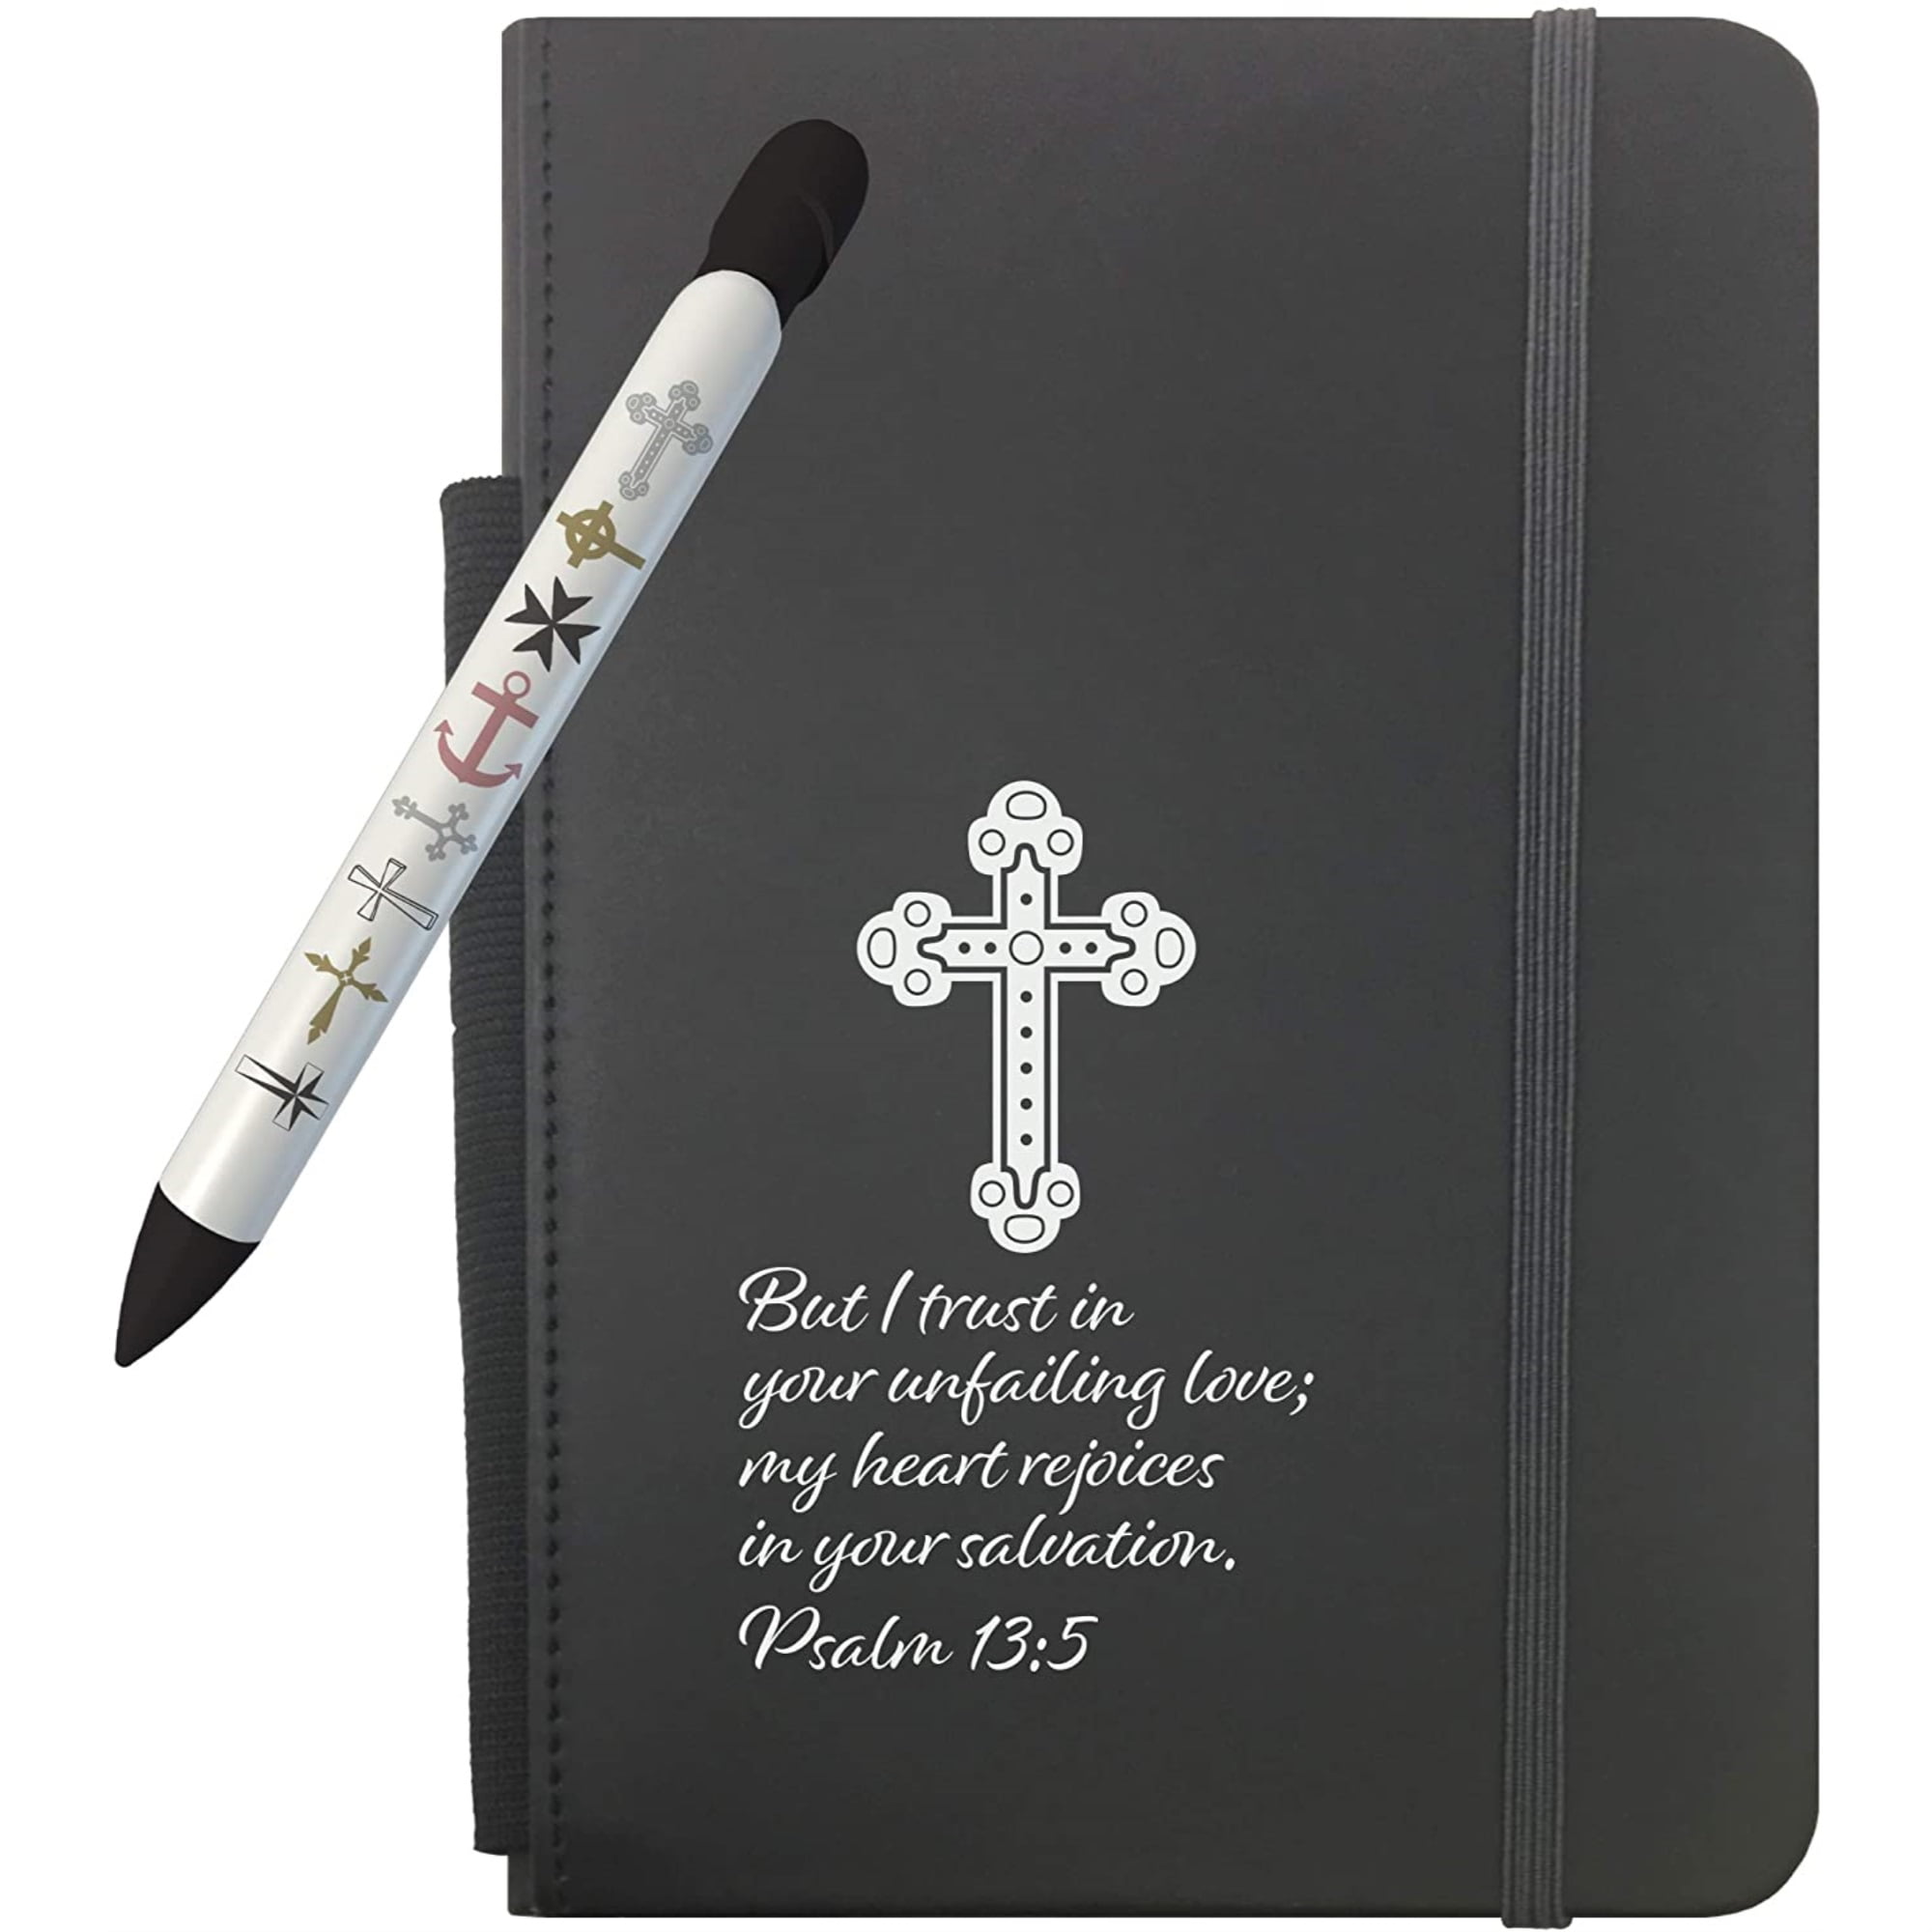 Cross & Fish Scripture Pens with Rotating Messages 6 Pen Set 36001 